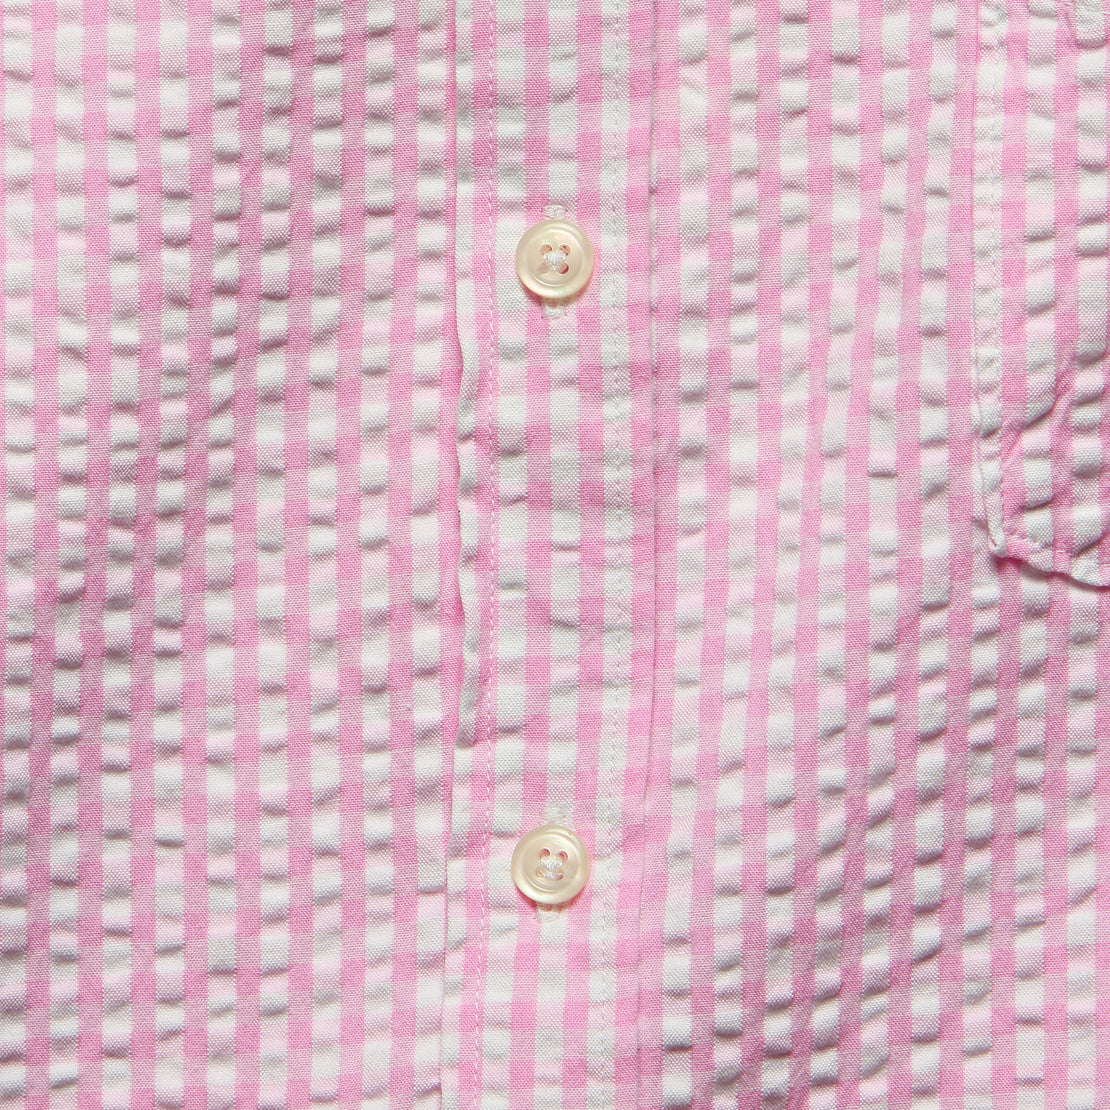 Everyday Shirt - Pink Gingham Seersucker - Universal Works - STAG Provisions - Tops - L/S Woven - Plaid